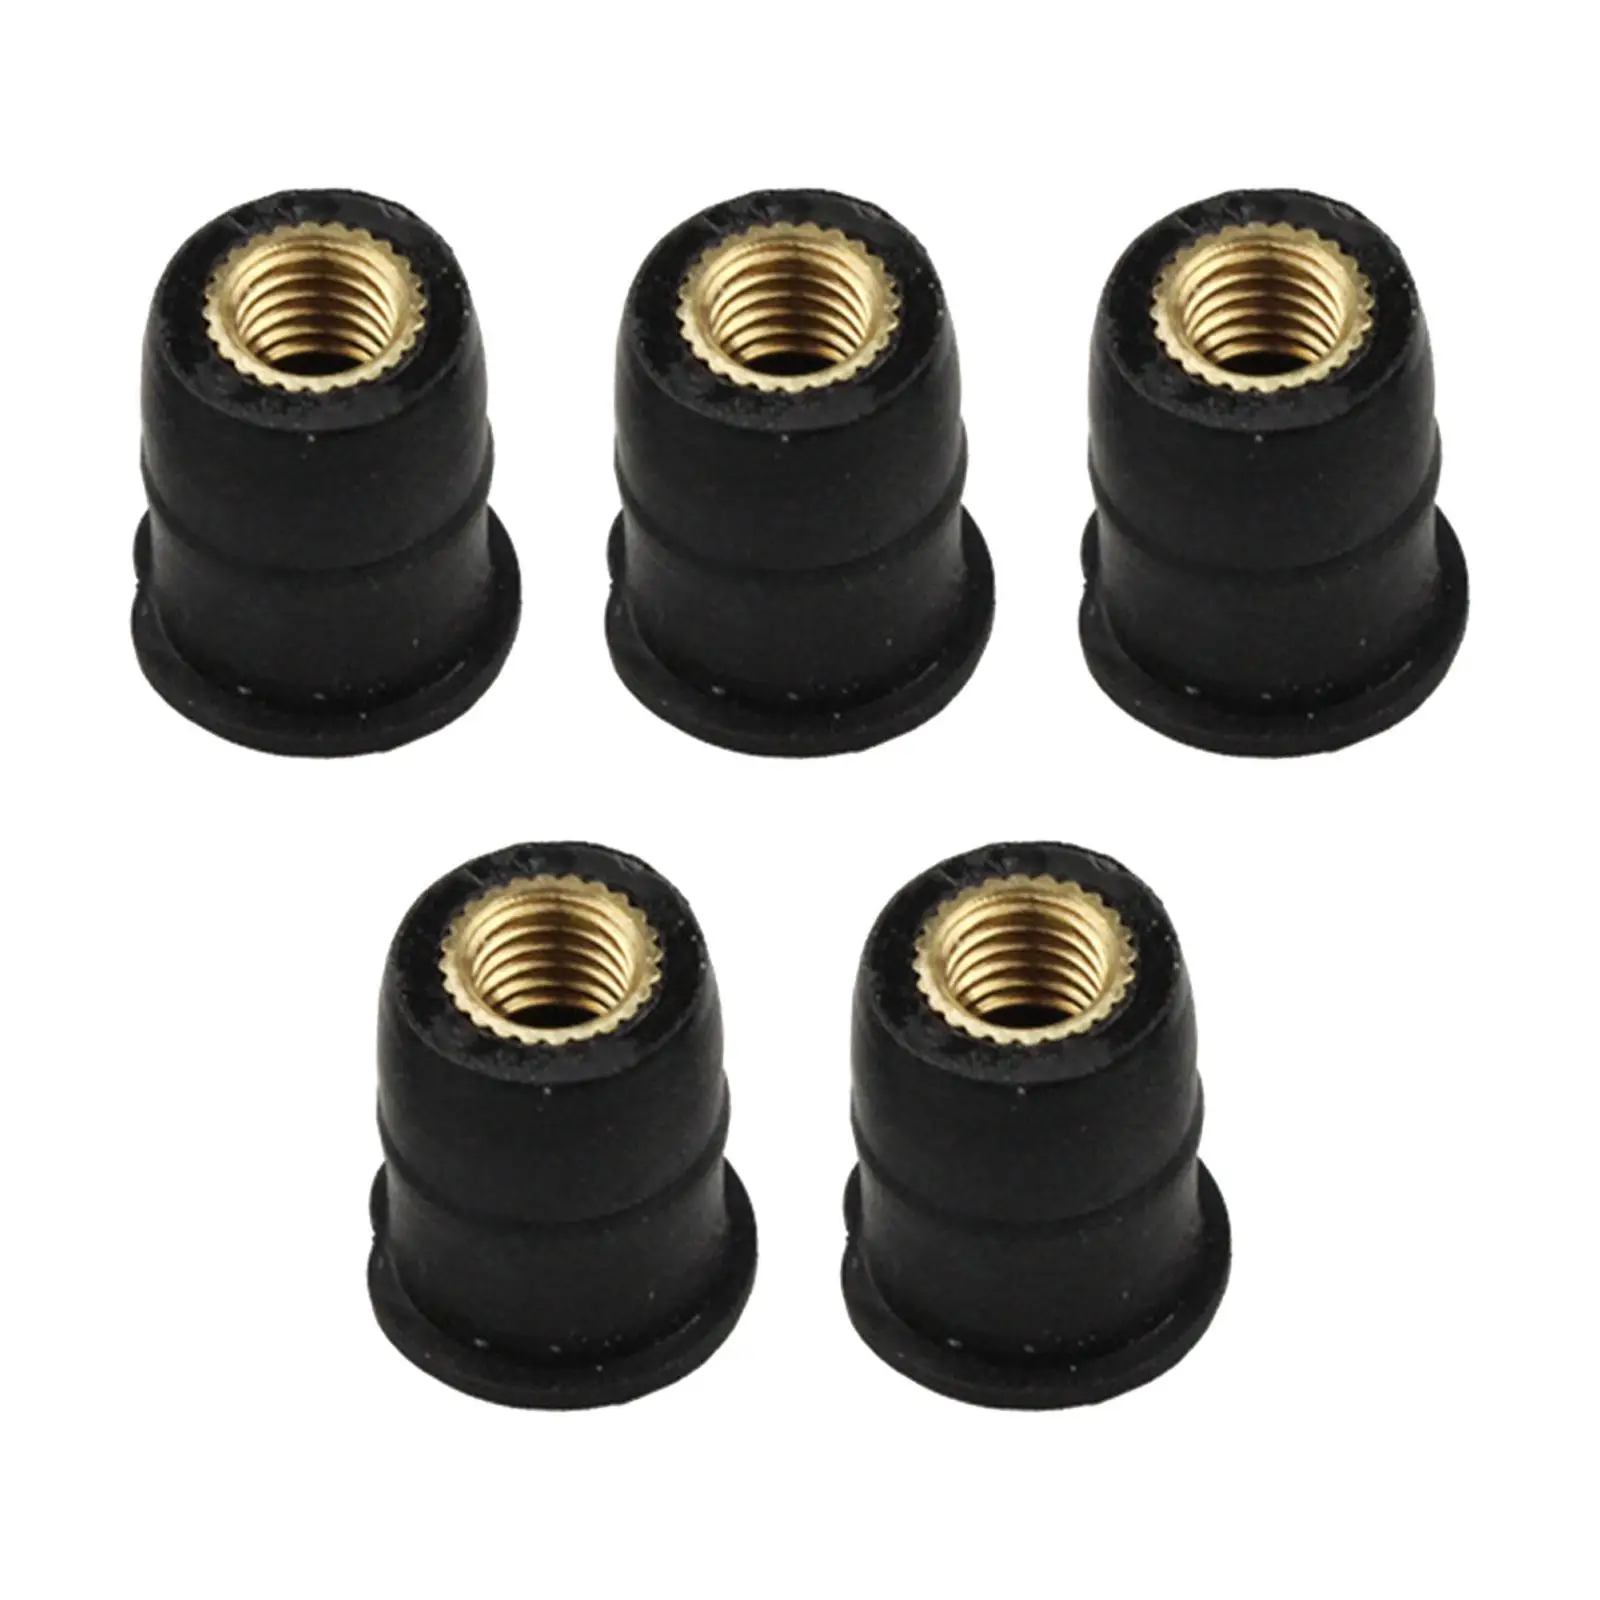 5 Pieces Windshield Rubber Well Nut Spare Parts Assembly Replaces Motorcycle Fastener Fairing Fastener for Canoe Boat Kayak